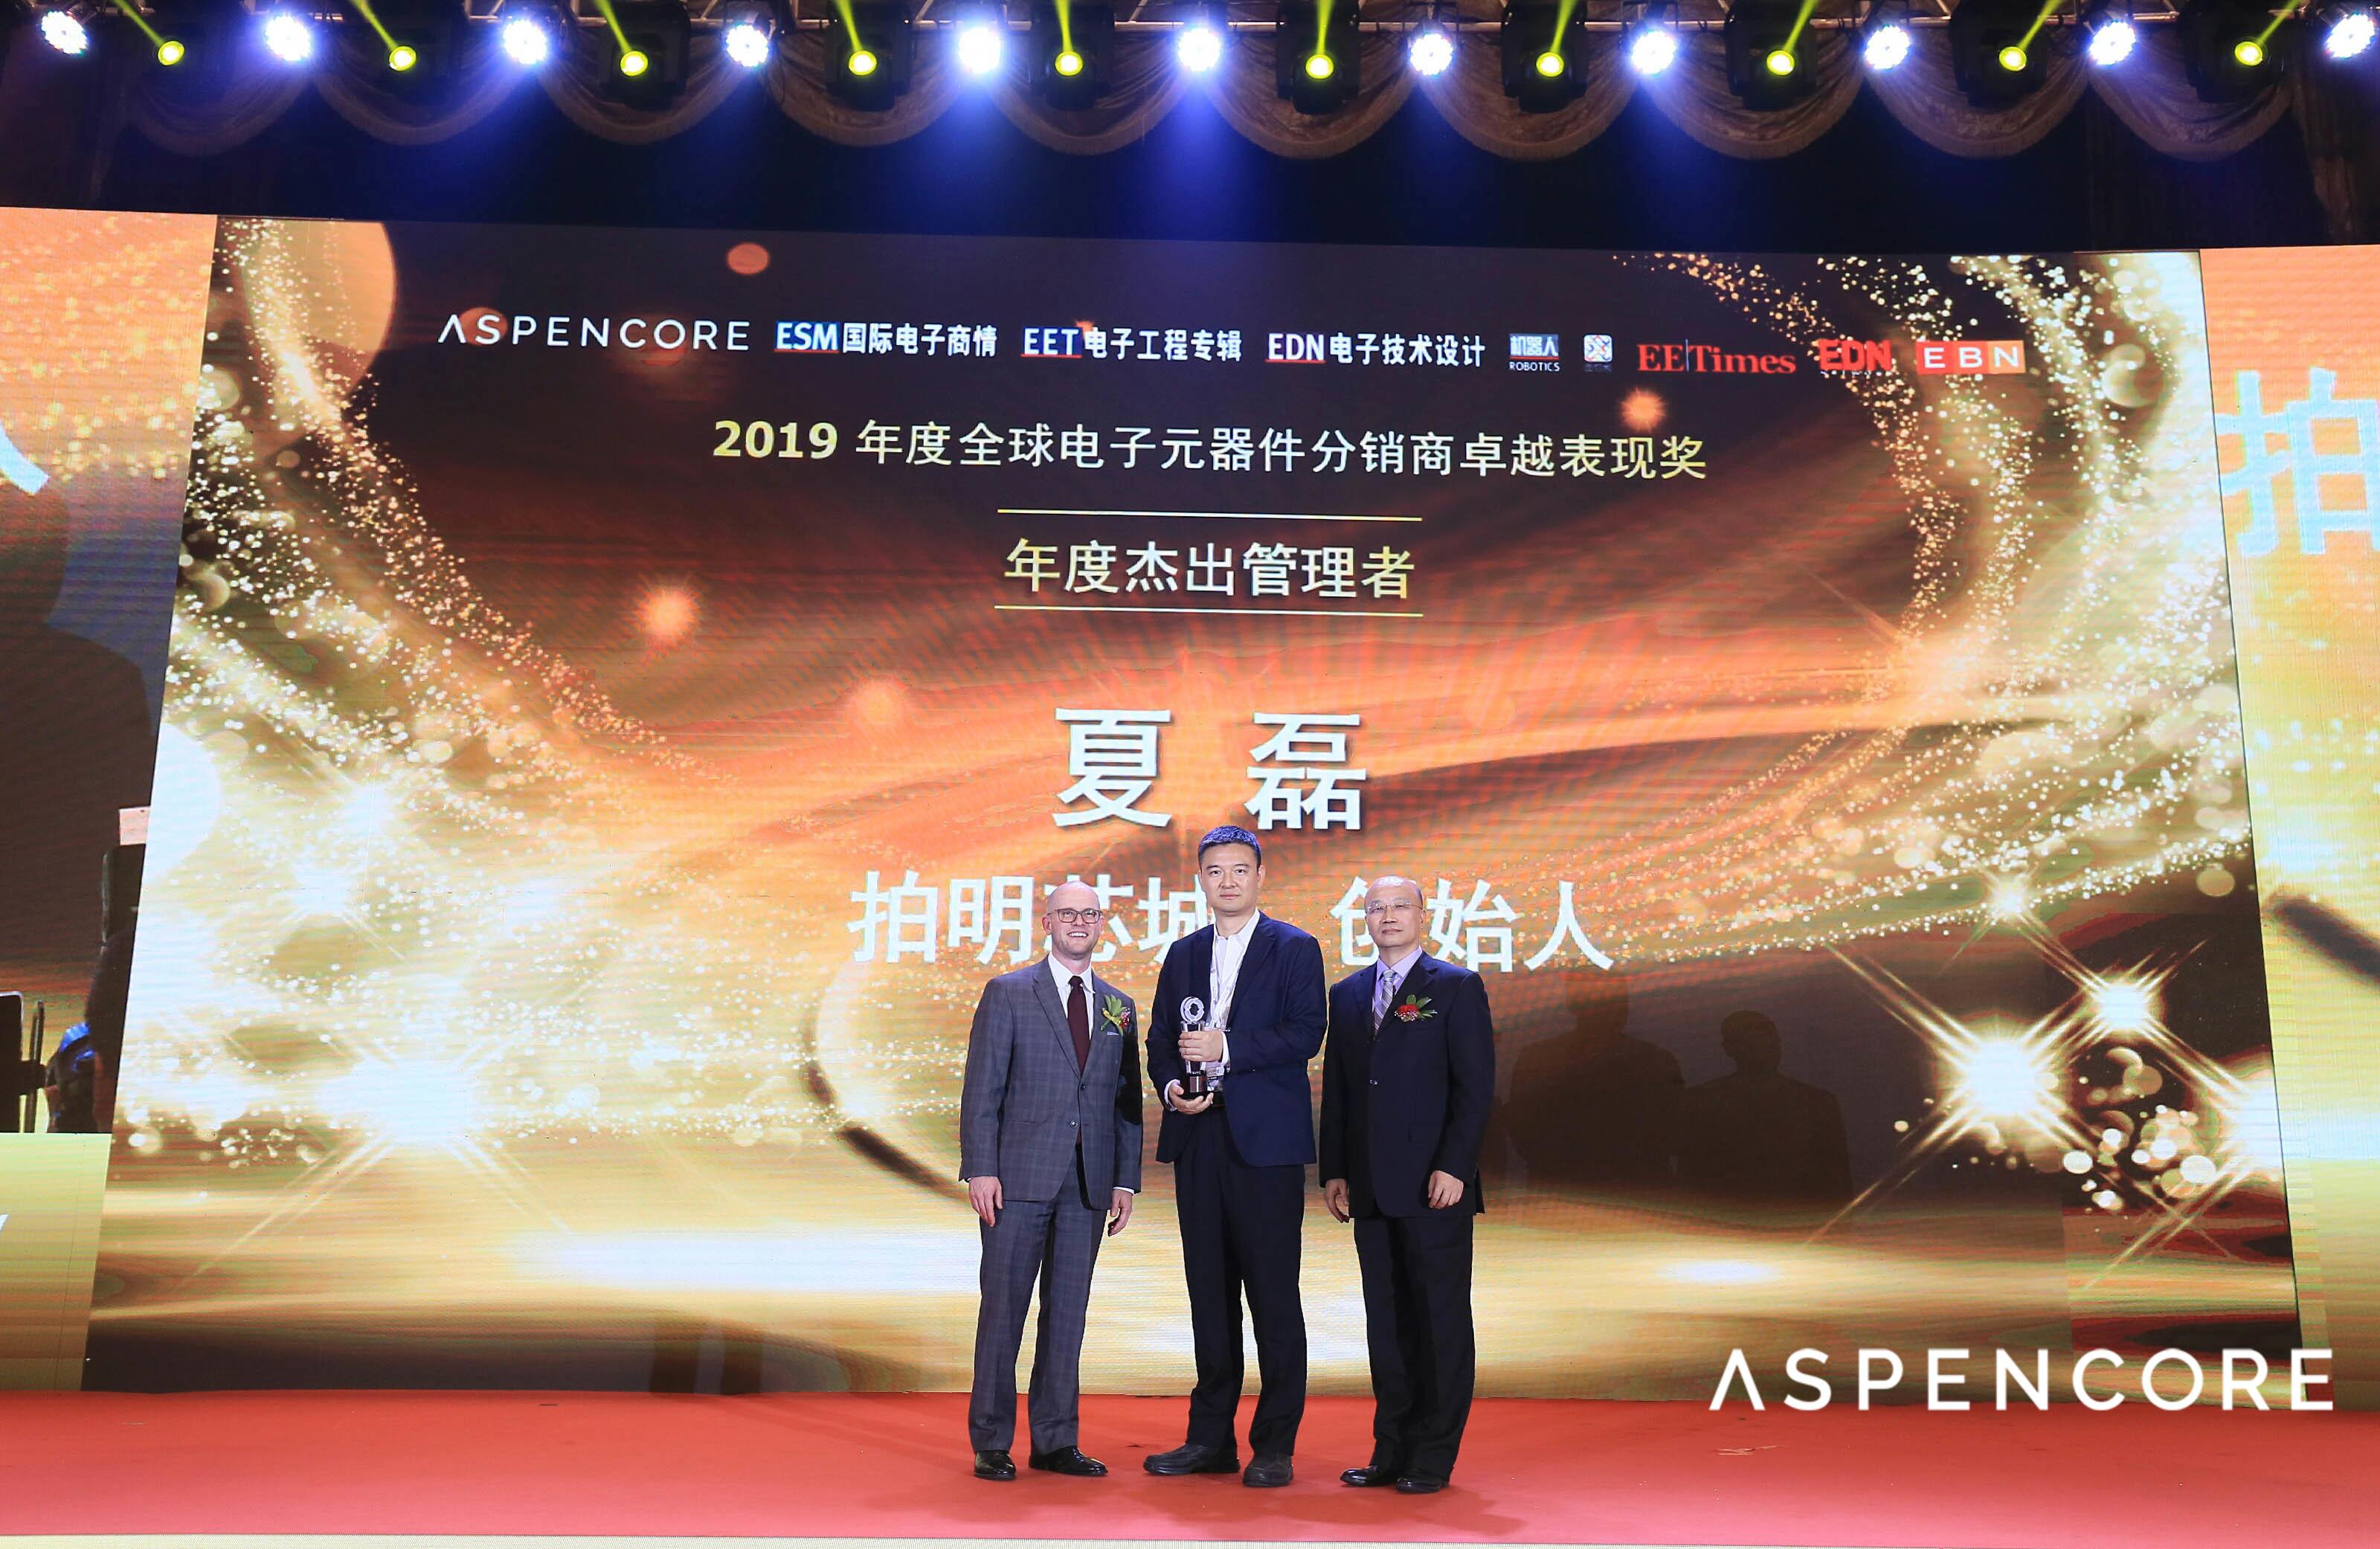 ICZOOM CEO Mr. Xia Lei Won 2019 Outstanding Manager Award